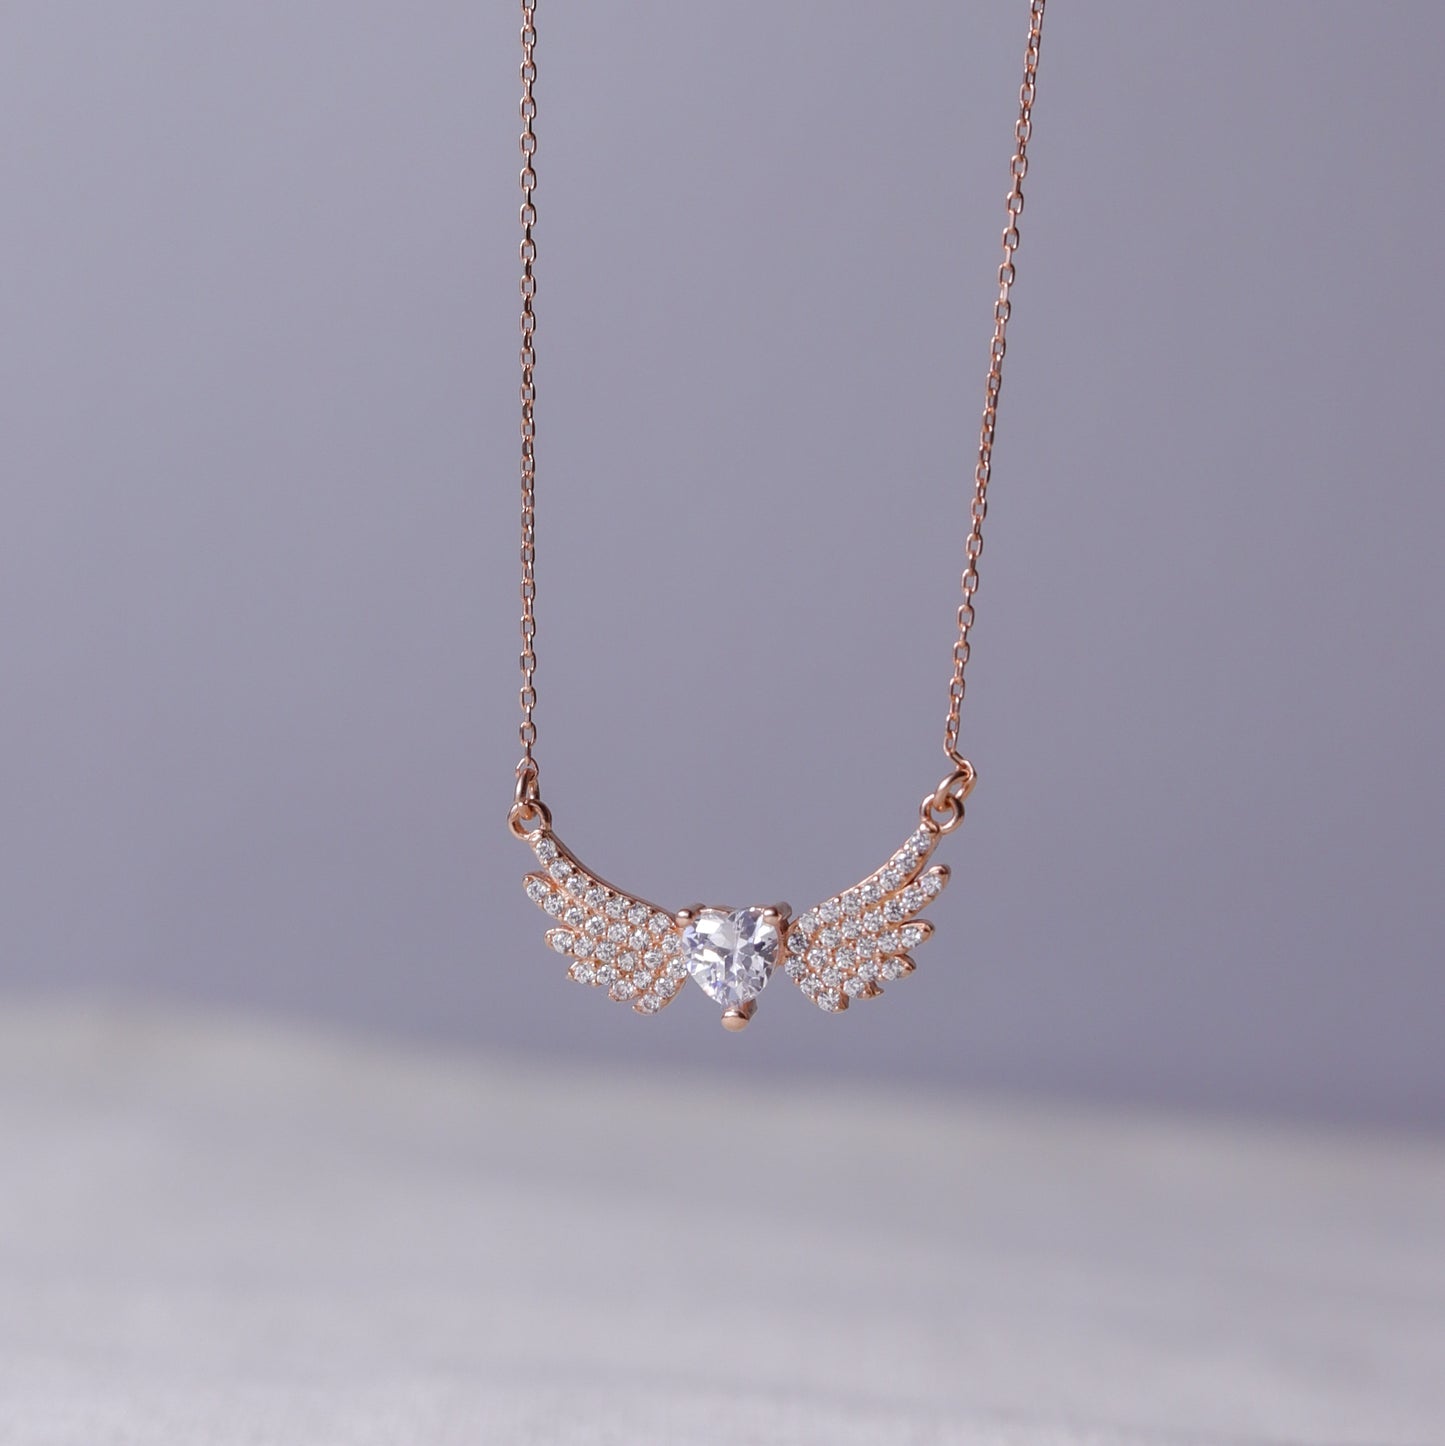 925 Sterling Silver Angel Wing Necklace with Zircon Stone